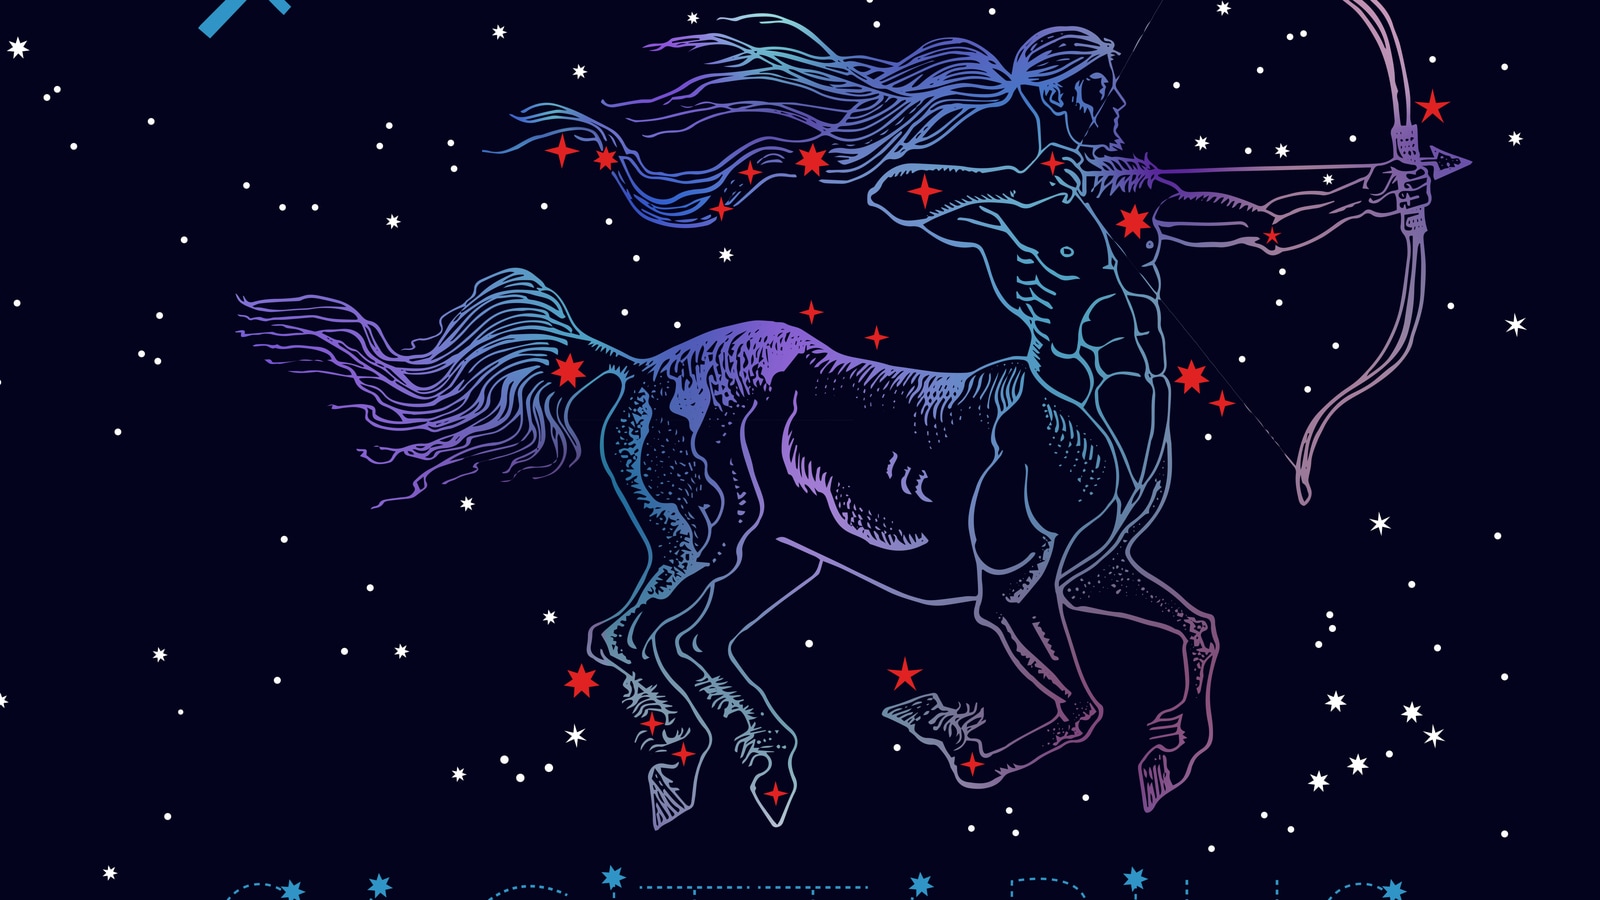 Sagittarius Horoscope predictions for March 11 Your stars fortell a